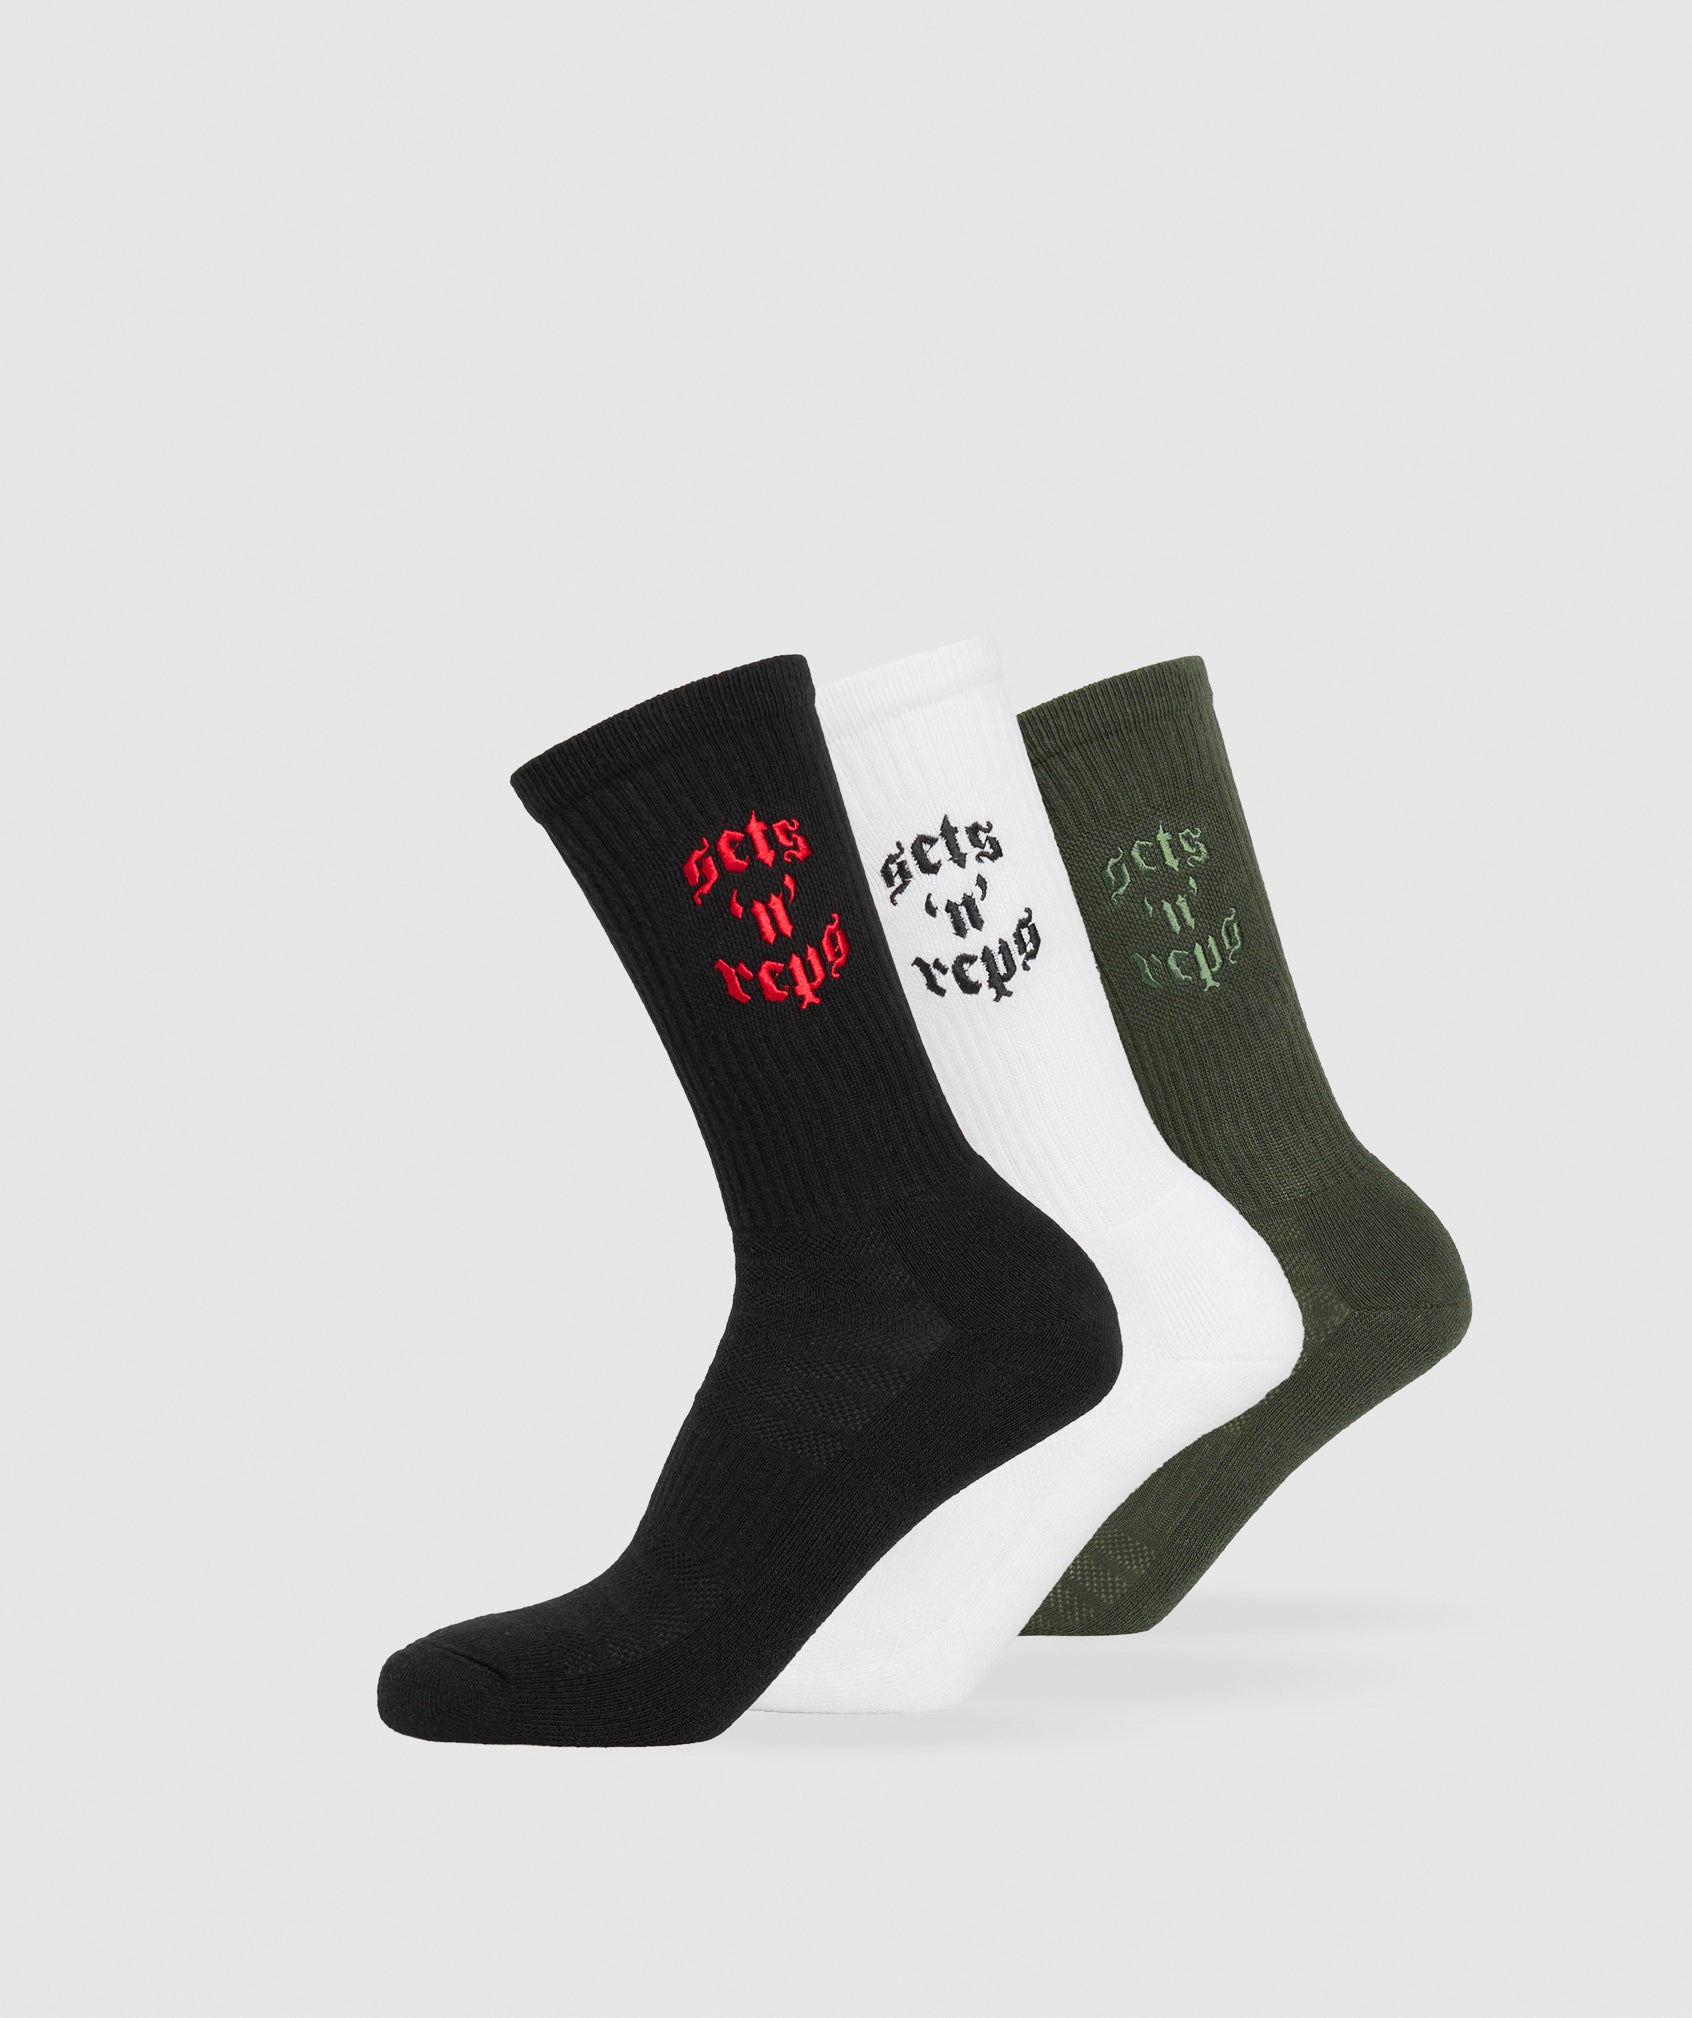 Sets and Reps 3pk Crew Socks in White/Winter Olive/Black - view 1